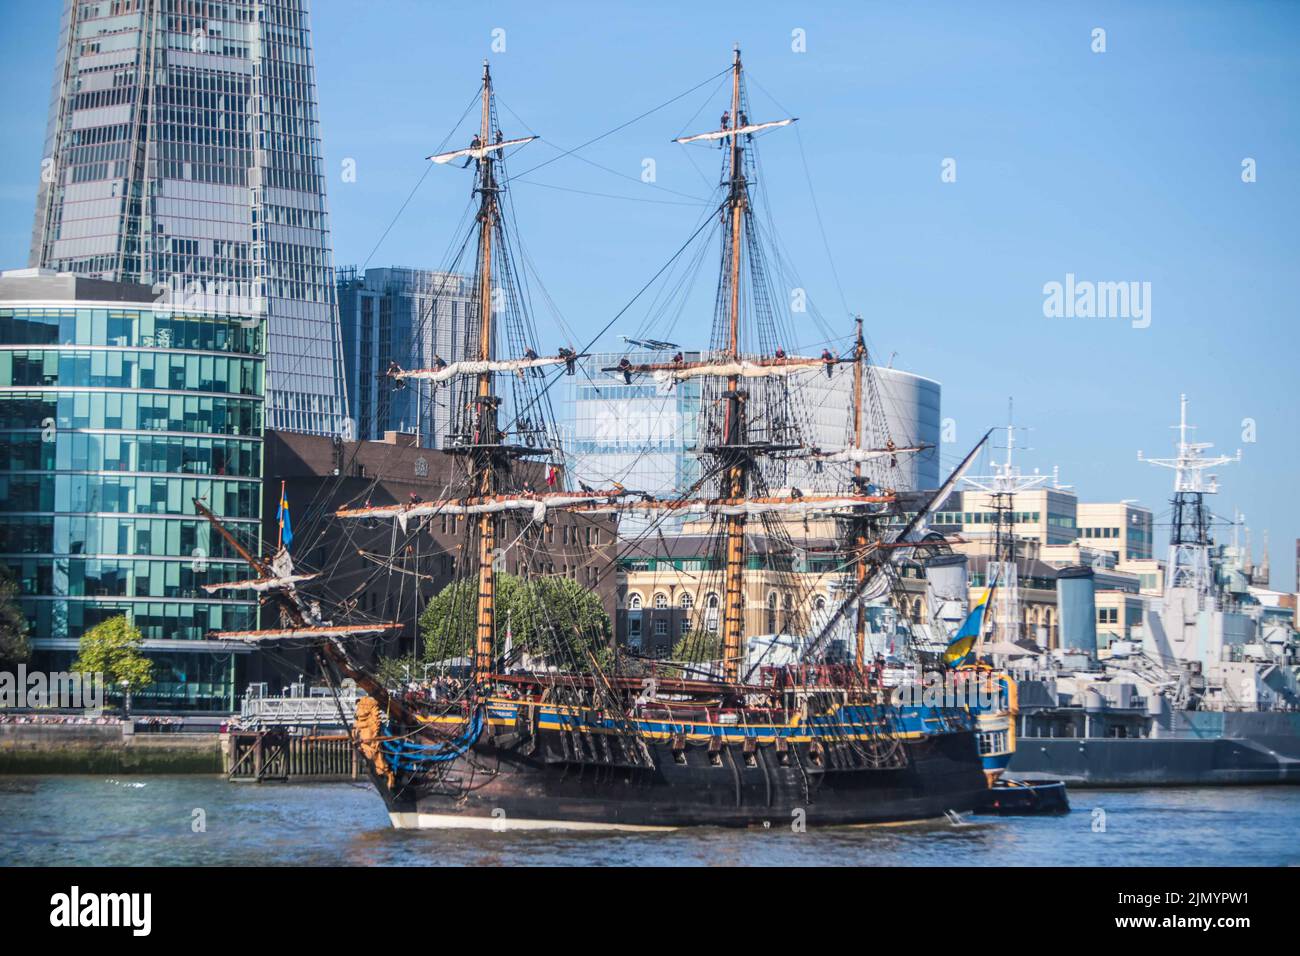 London UK 8 August 2022 Replica 18th century Swedish ship Götheborg sailed into London today.Sailors can be seen on top of the sails . The world's largest ocean-going wooden sailing ship passed through the elevated Tower Bridge,  fifteen years after  the ship last visited London. She will be docked at South Dock Quay in Canary Wharf. Open to visitors every day of the stopover. Paul Quezada-Neiman/Alamy Live News Stock Photo